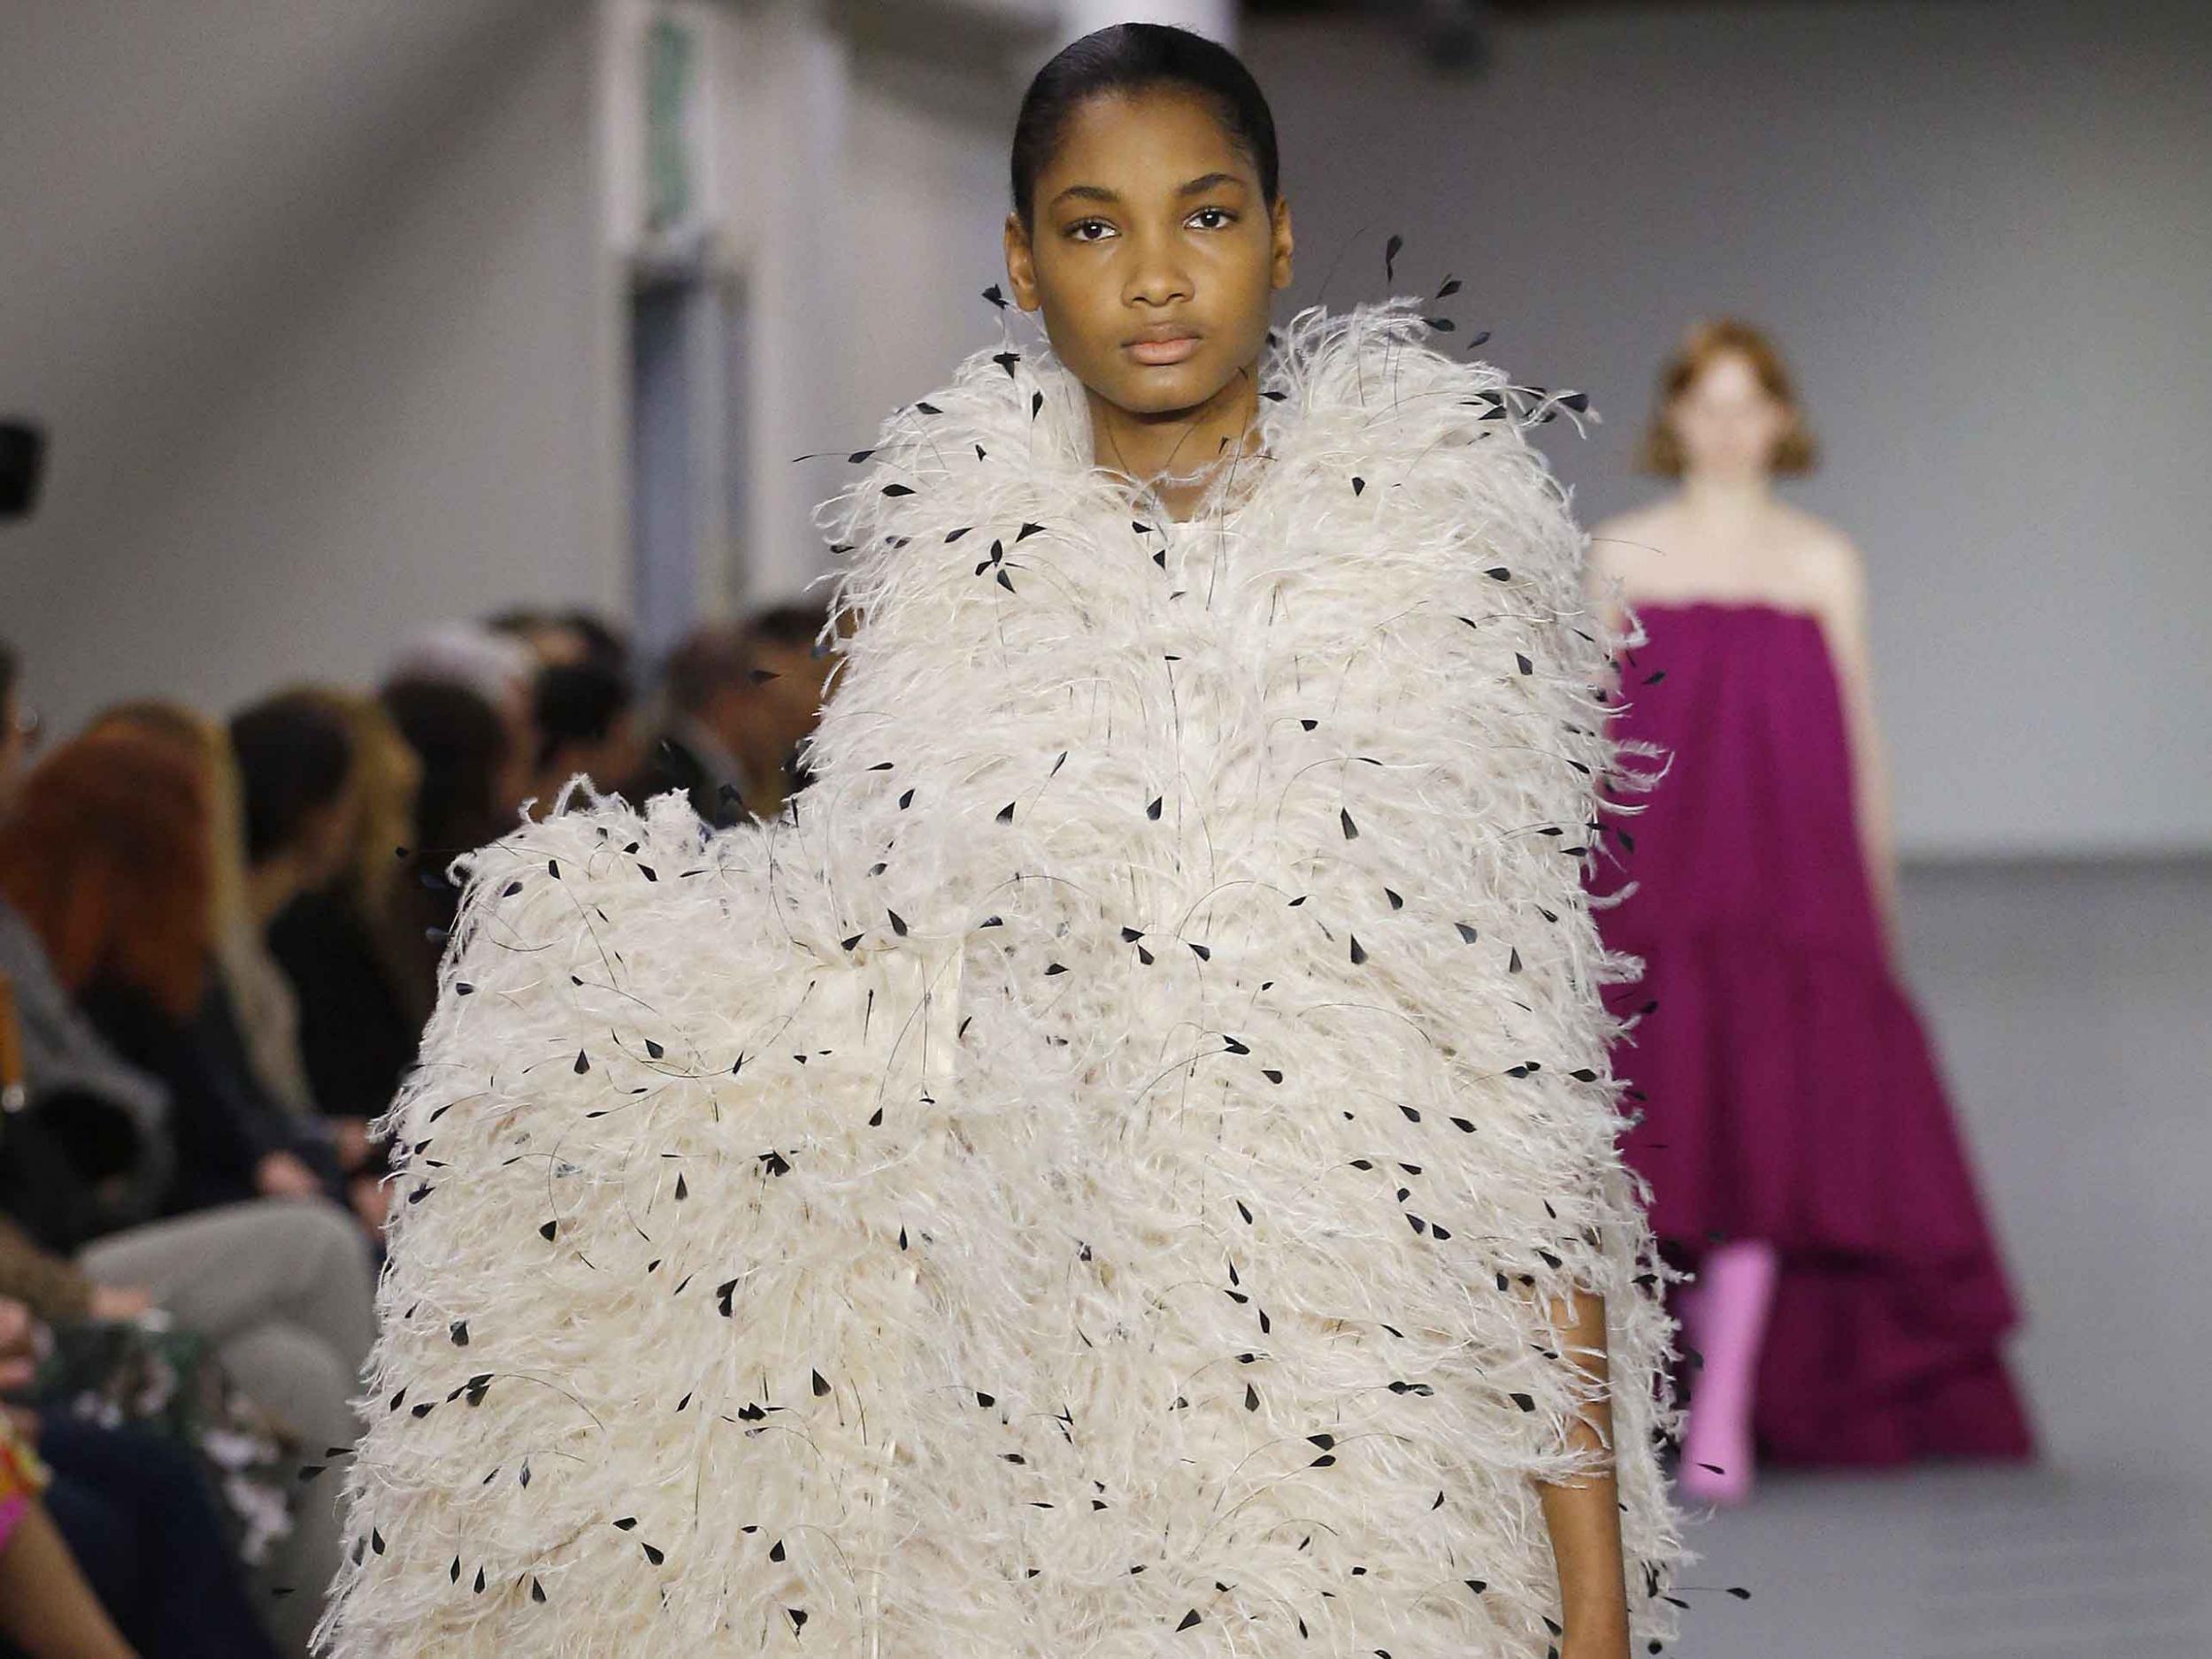 Balenciaga paraded plumes in the most impressive manner